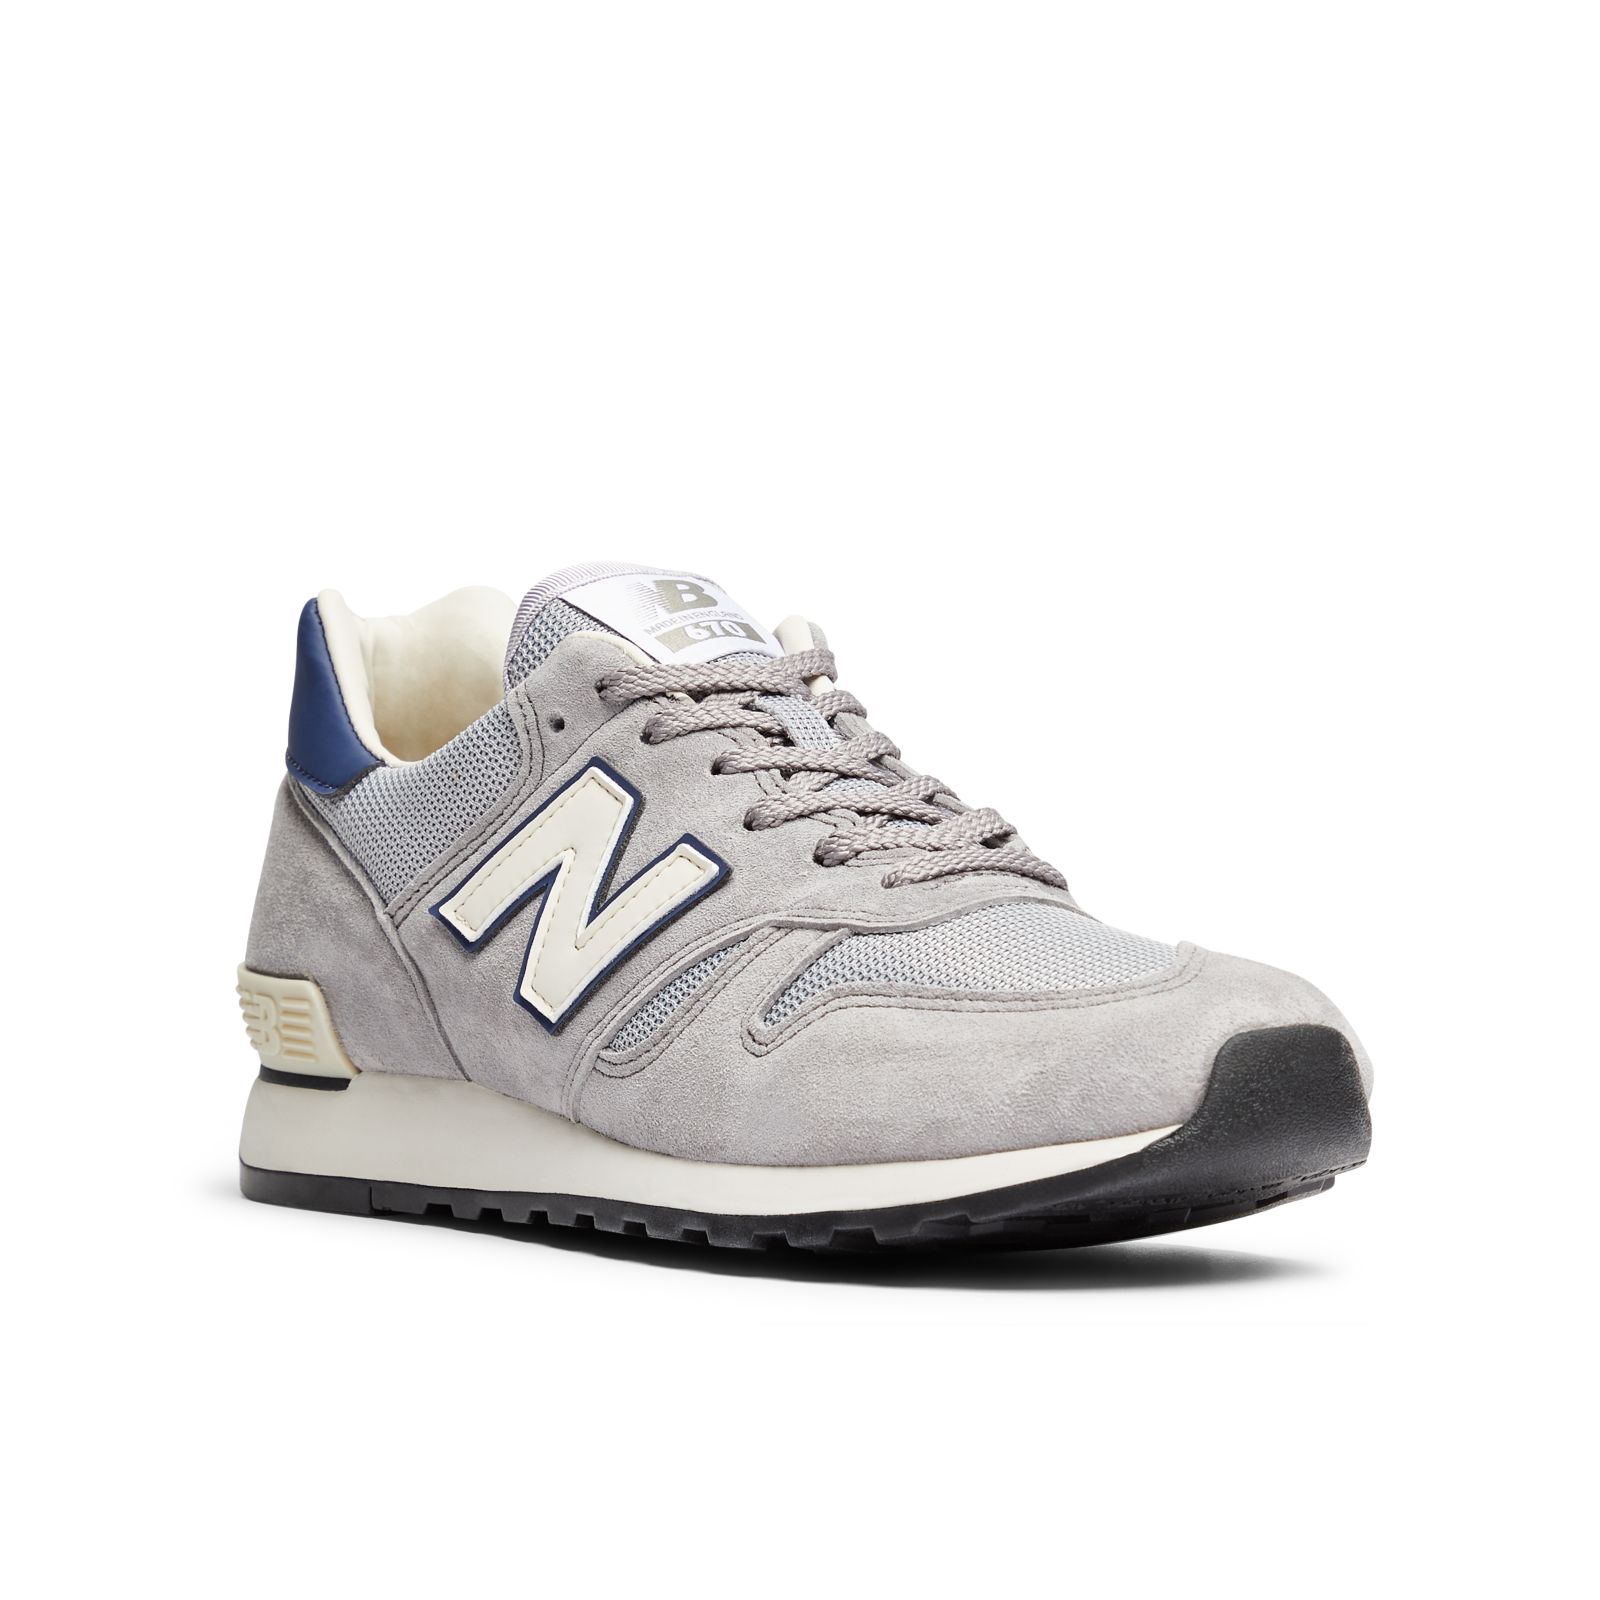 Hombre MADE in UK 670 New Balance